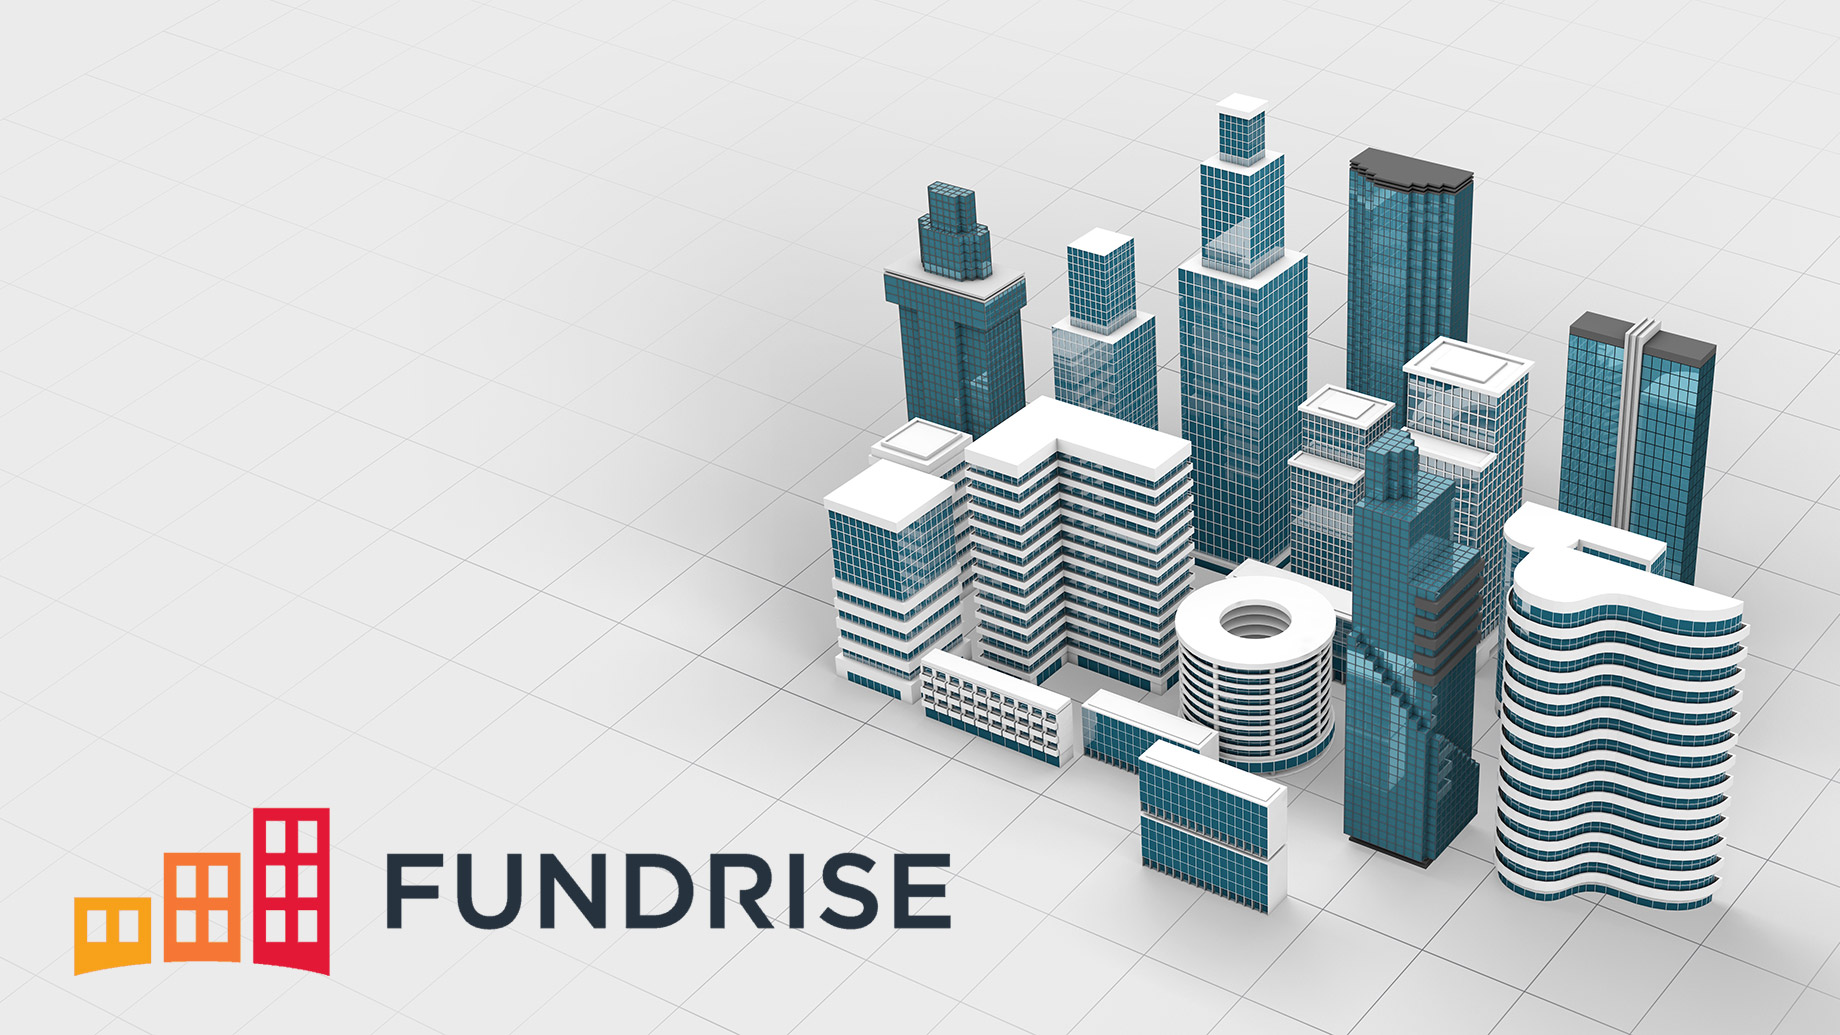 Fundrise - A New Property Investment Platform